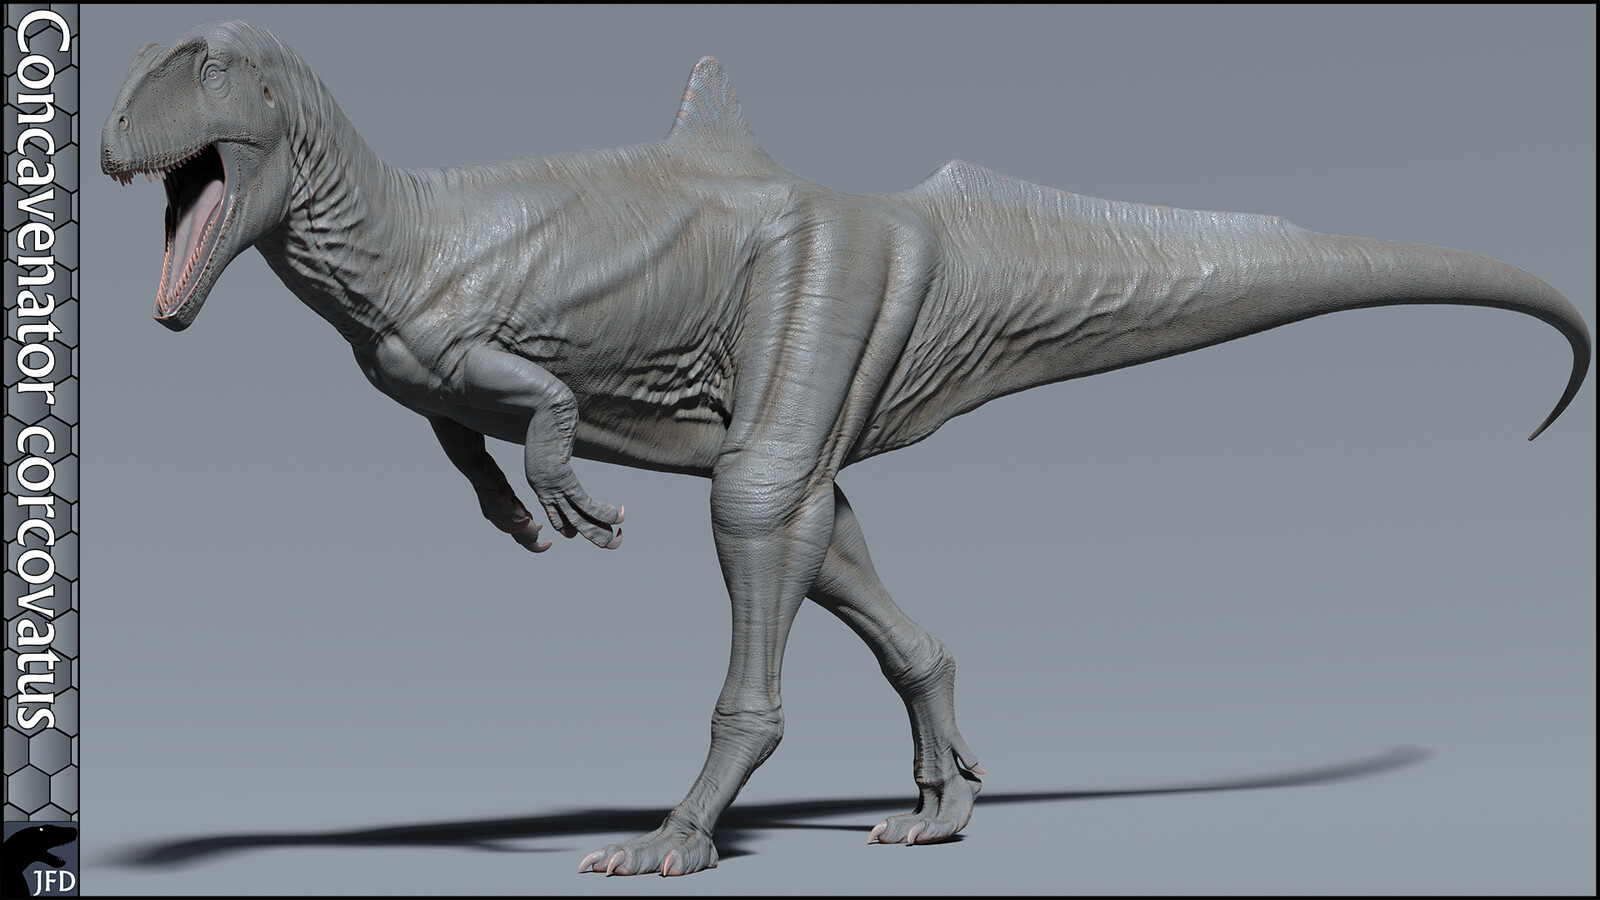 Concavenator corcovatus full body normal map and displacement render.